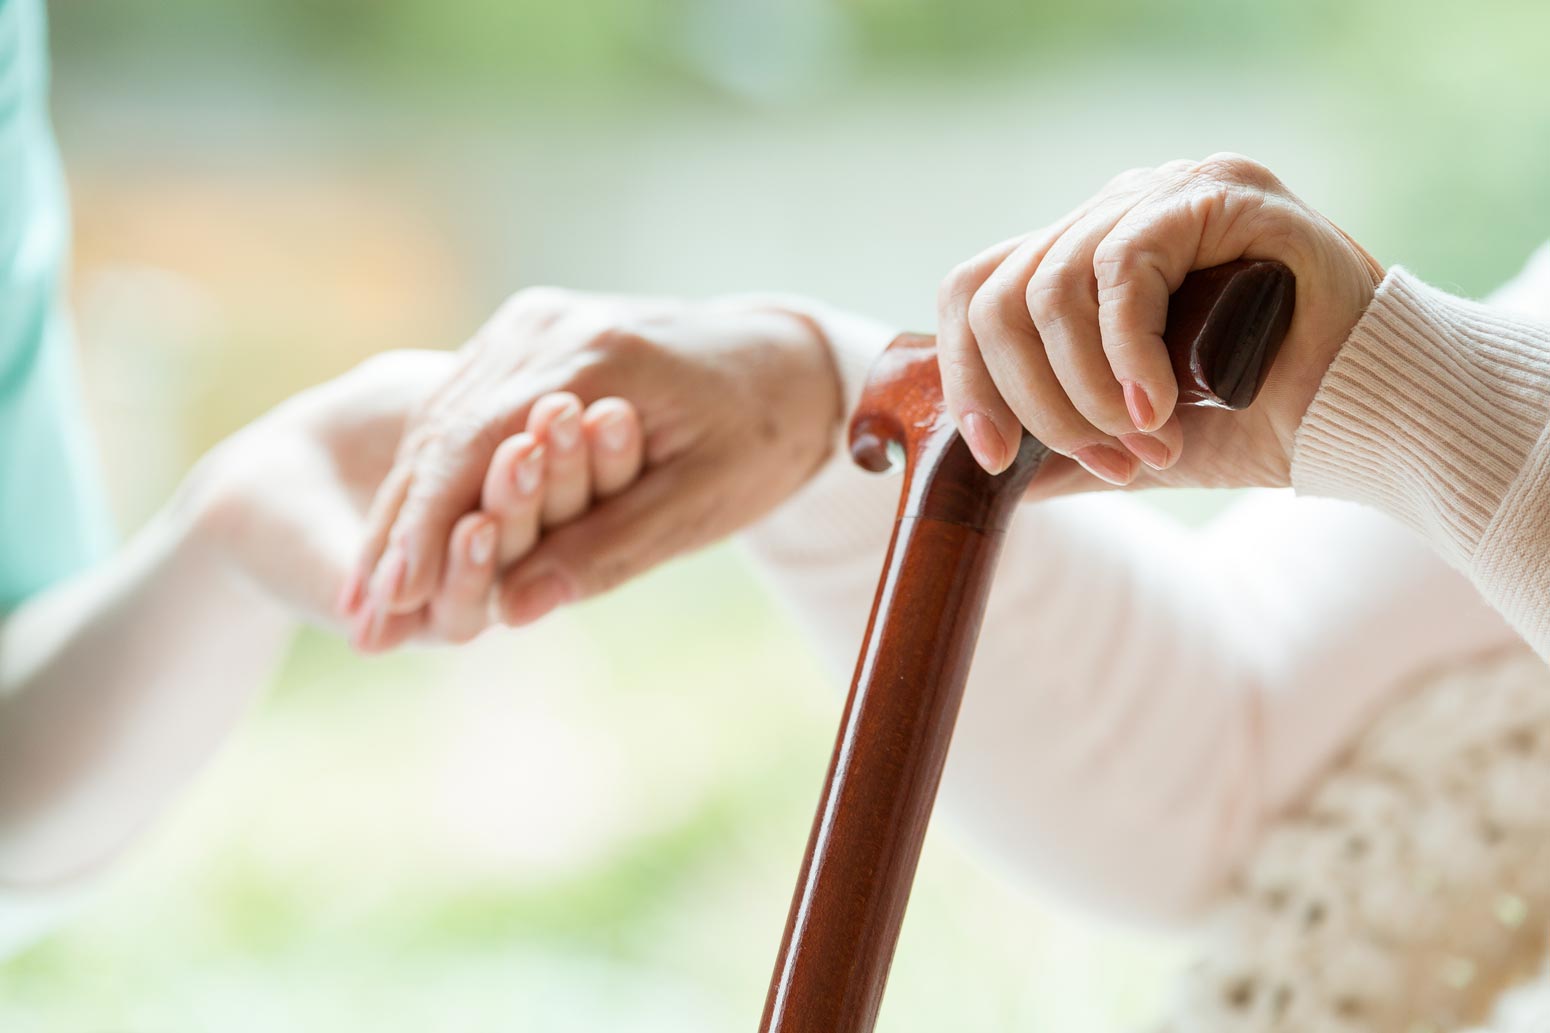 family member holding old woman's hand to talk about death arrangements